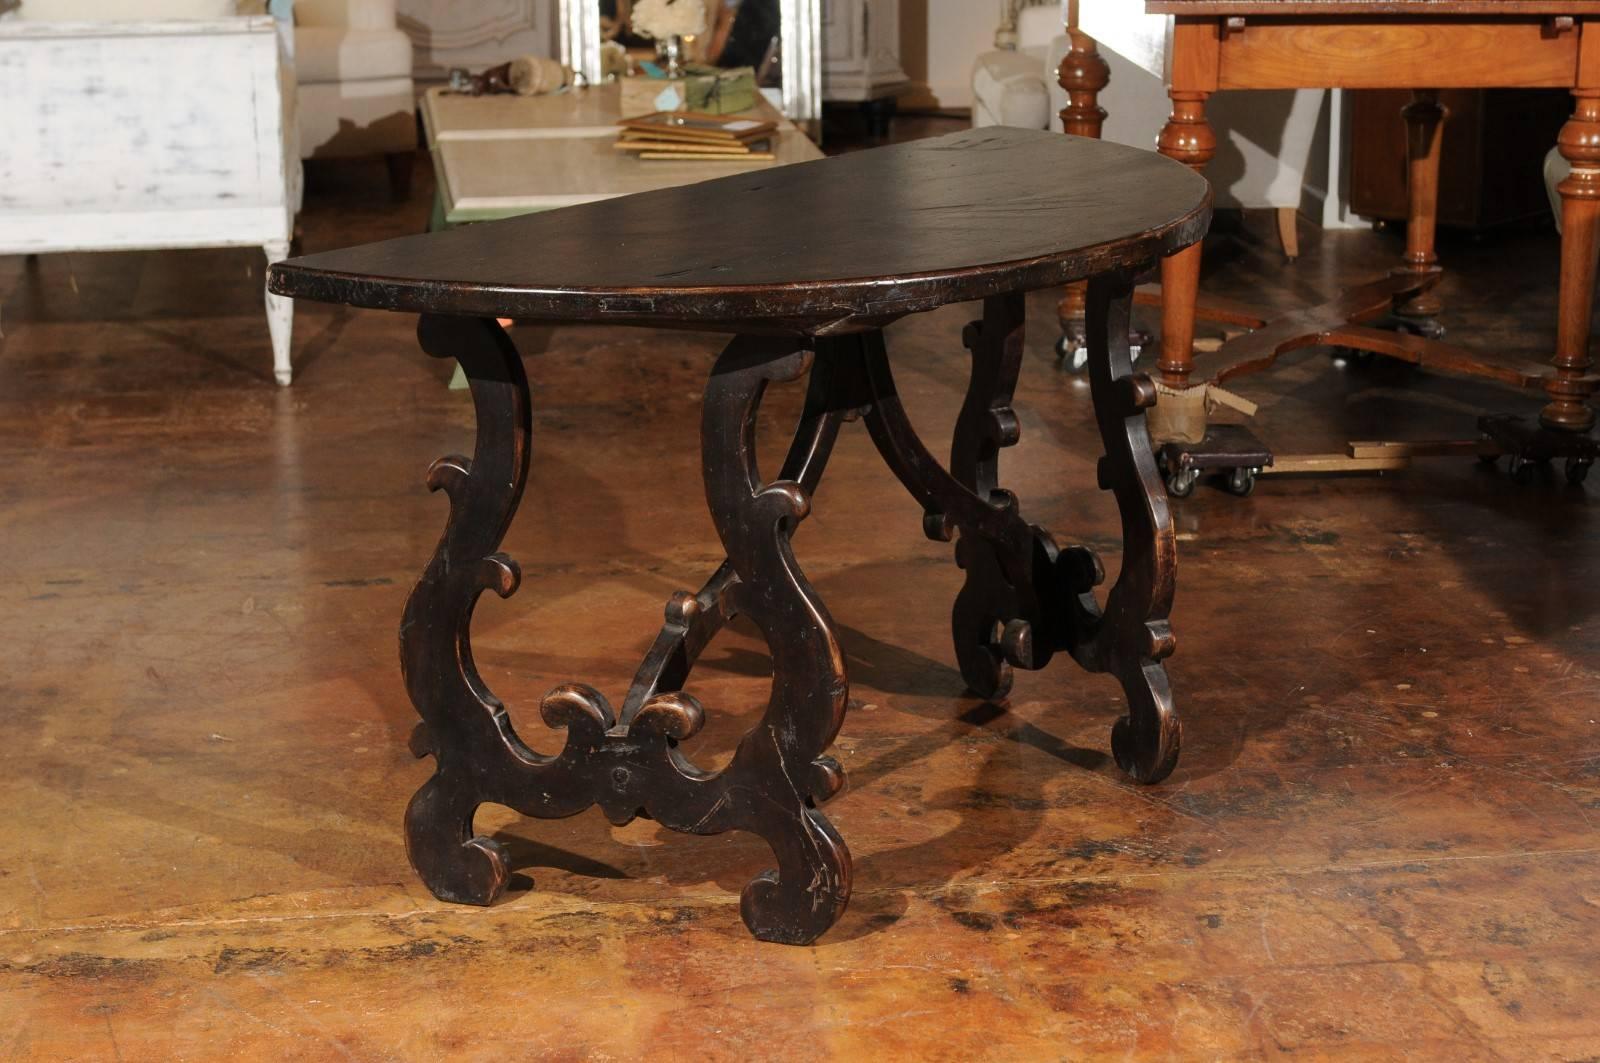 A pair of Italian Sienese Baroque style walnut demi-lune consoles tables with lyre-shaped legs from the late 18th century. Born in the Tuscan city of Siena, this pair of Italian demilune was found in a villa. Each table features a semi-circular top